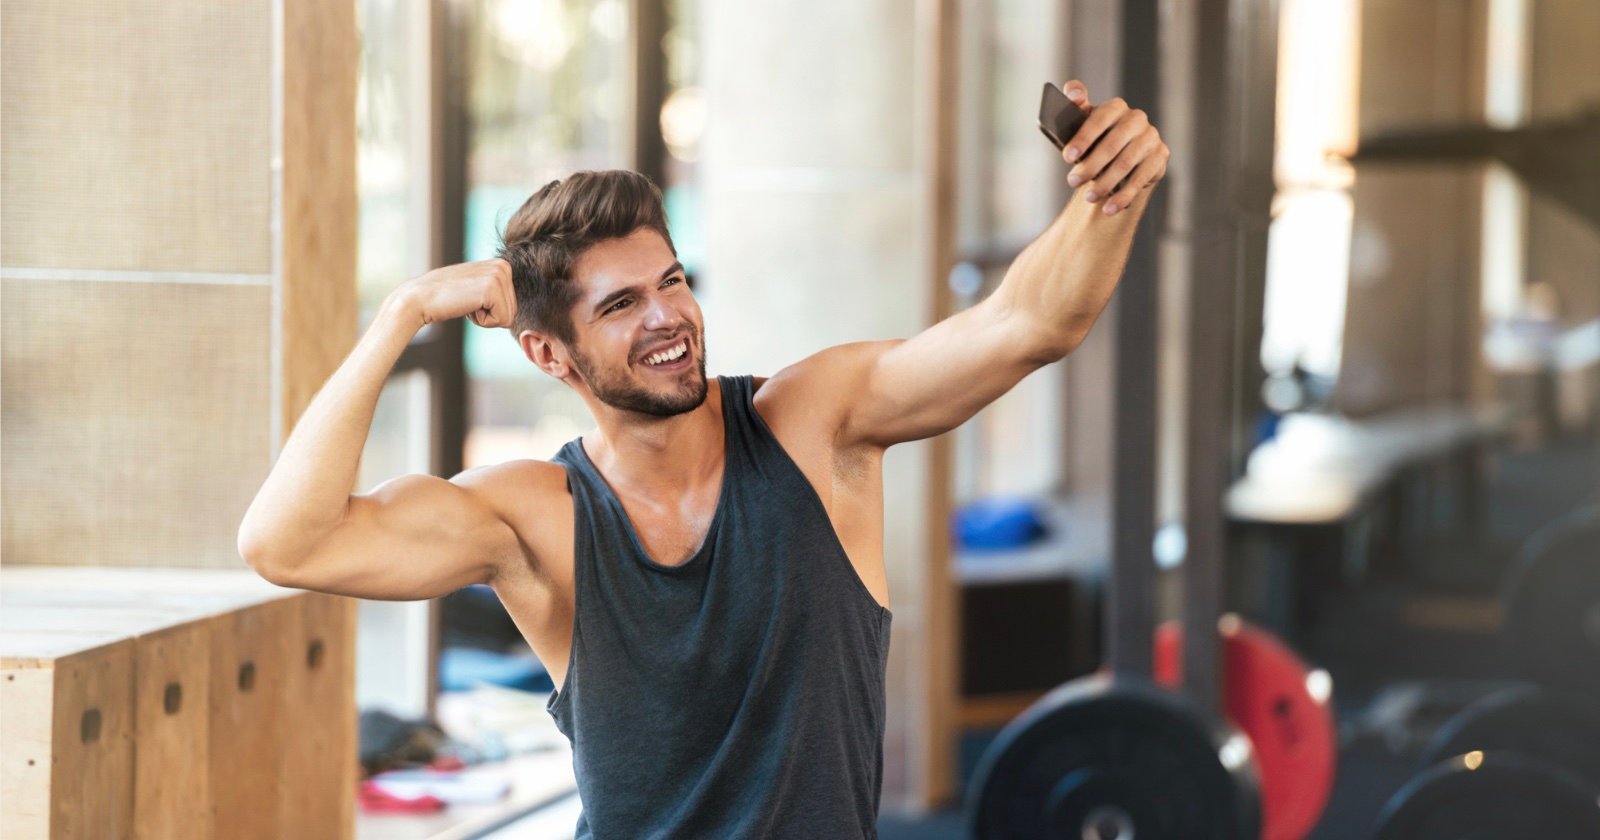 UK Gyms are Cracking Down on Cameras and Selfies